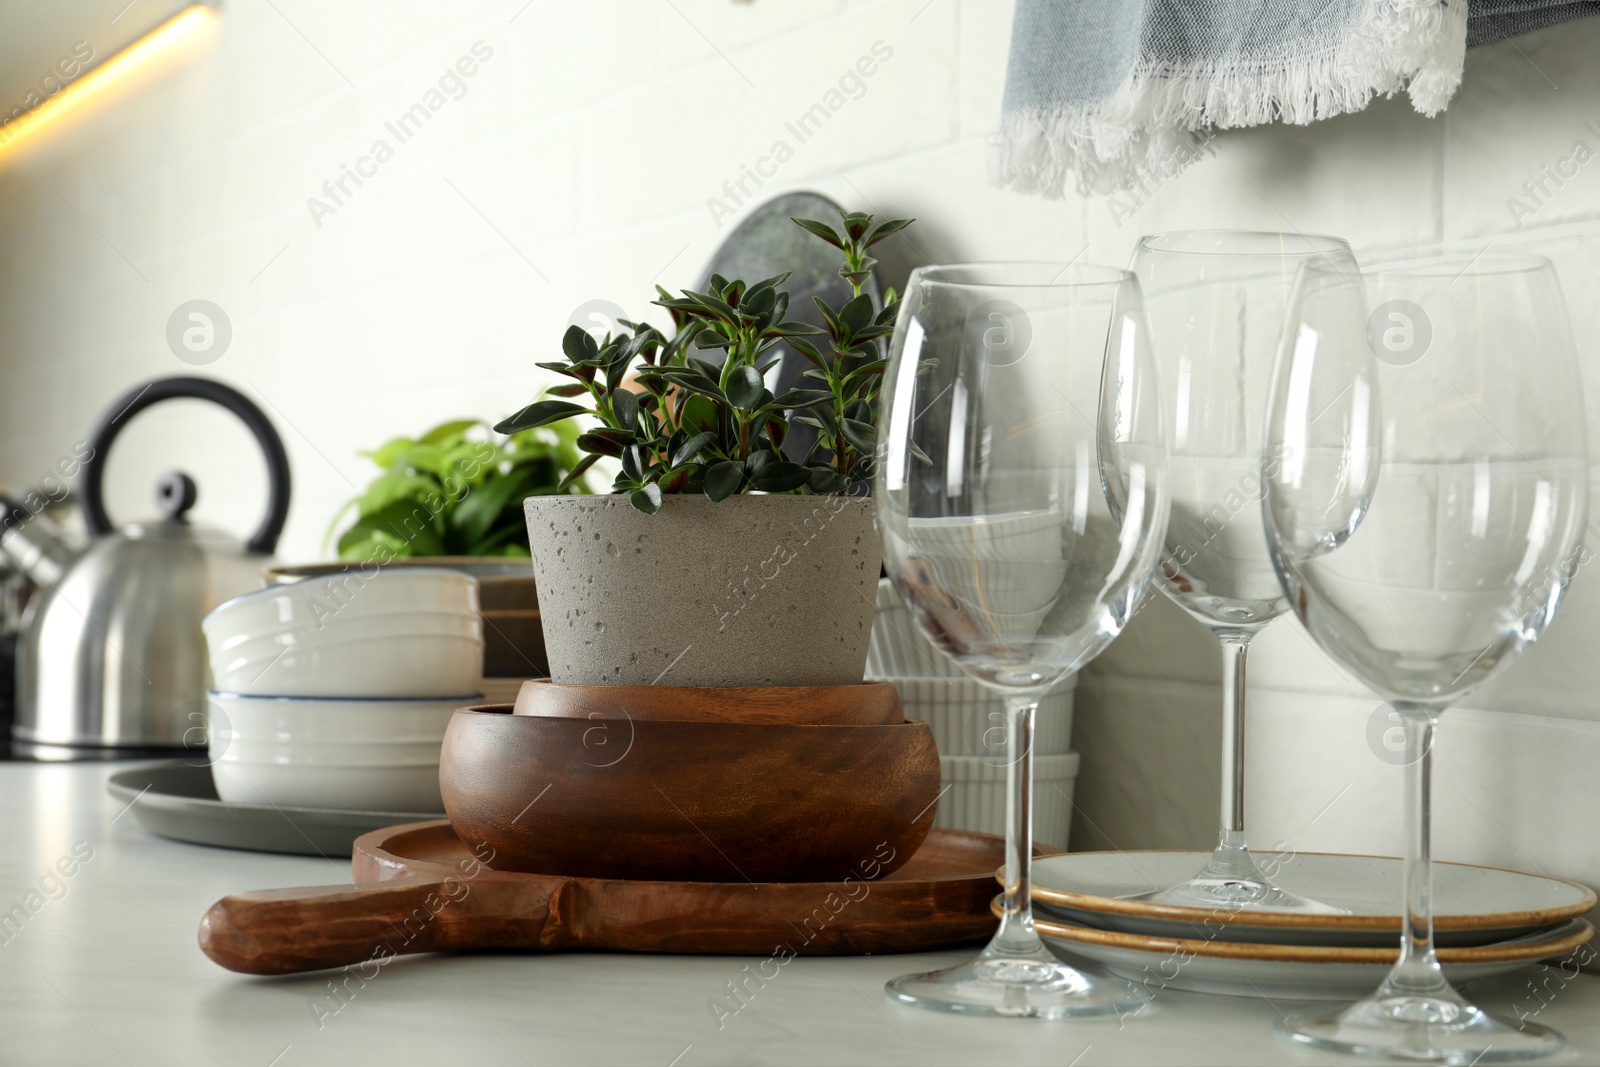 Photo of Set of clean tableware on white countertop in kitchen